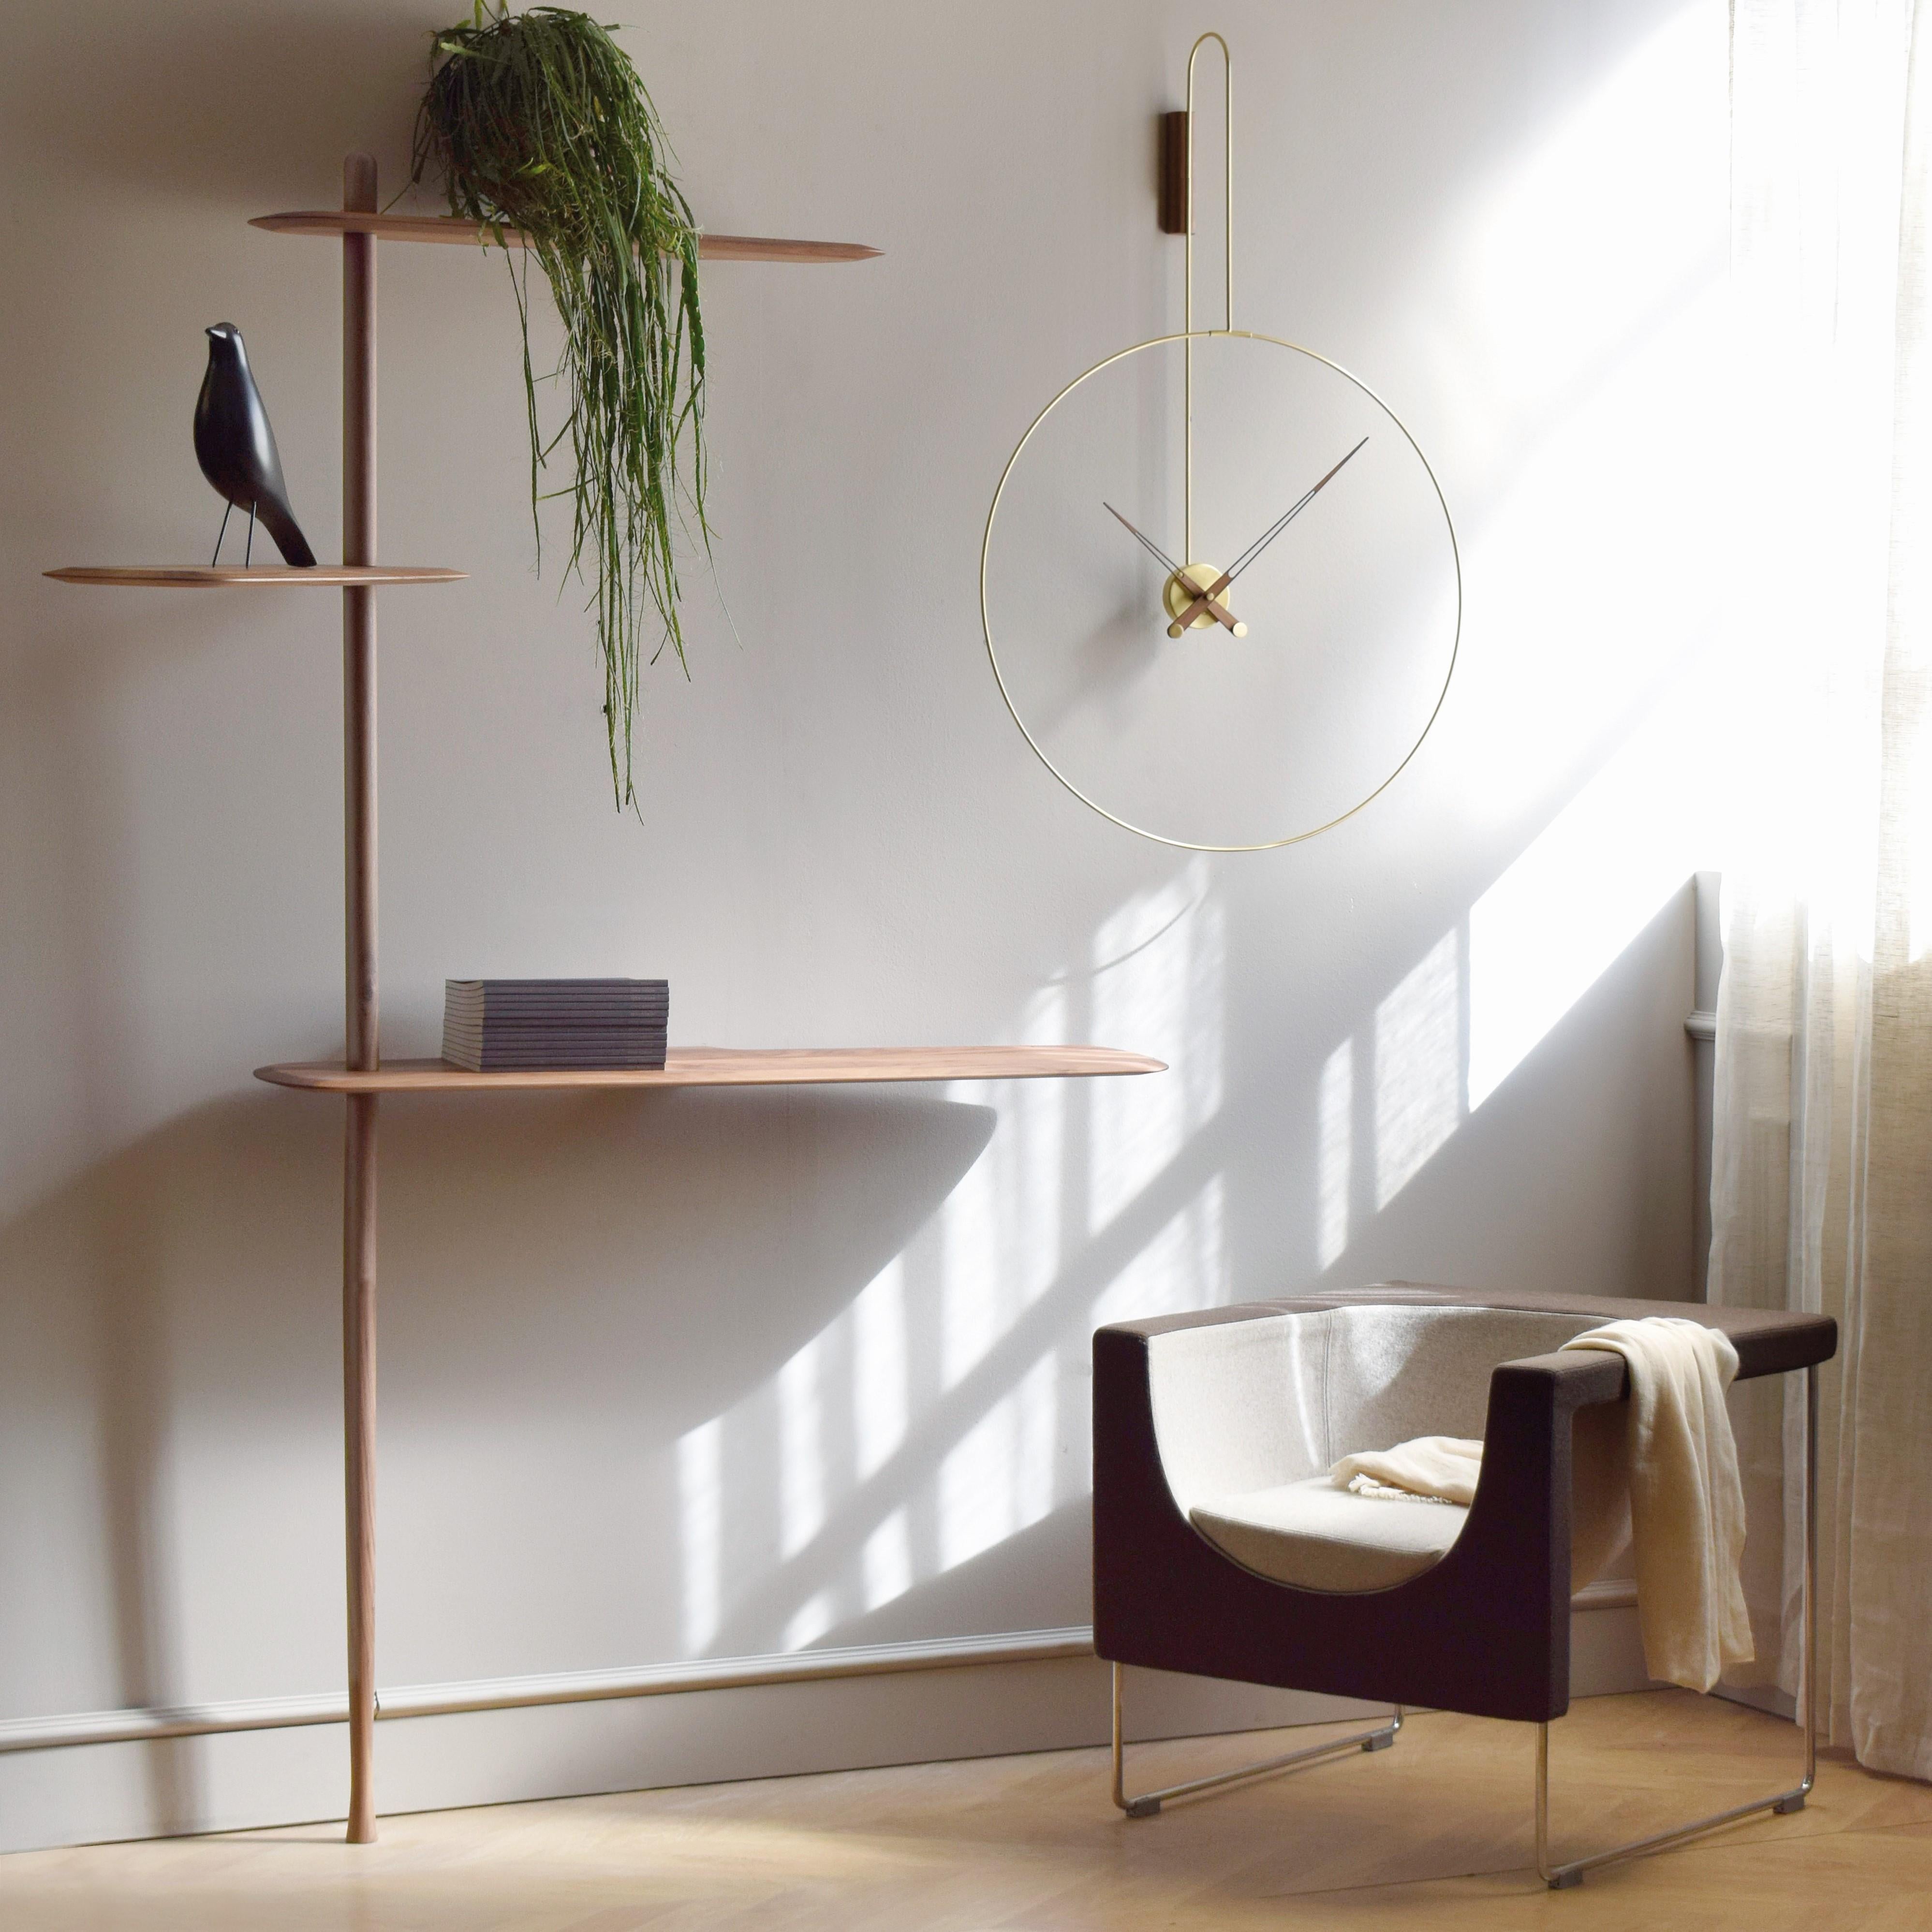 ø70cm clock with a length of 108 cm, characterized by its curved, polished brass elements. Hands in natural walnut wood.


Available in Walnut, Brass